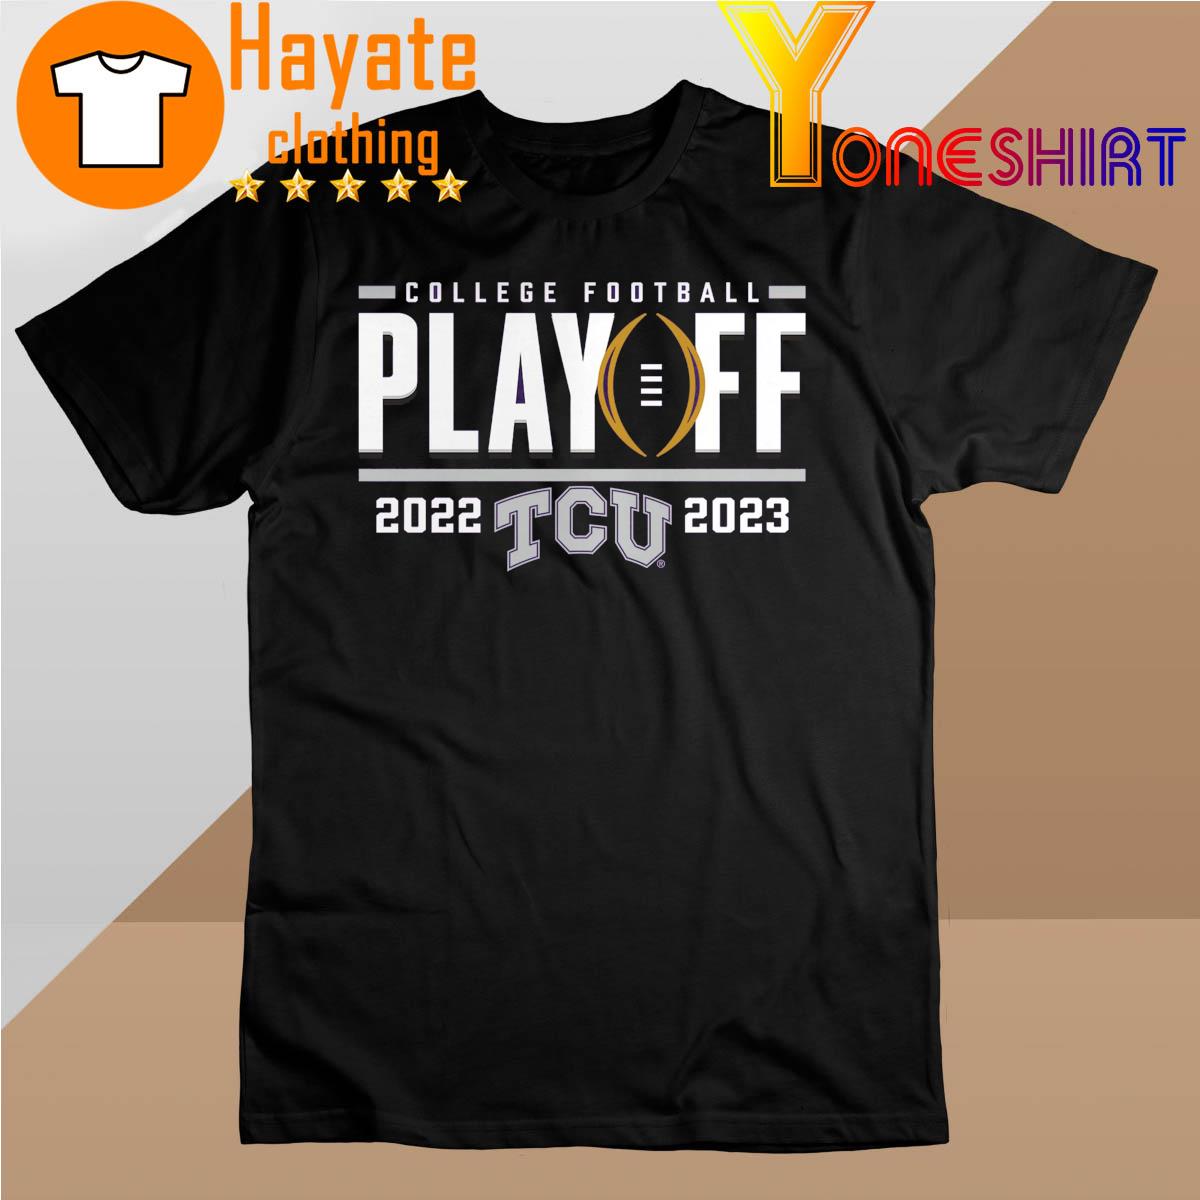 TCU Horned Frogs College Football Playoff 2022-2023 shirt